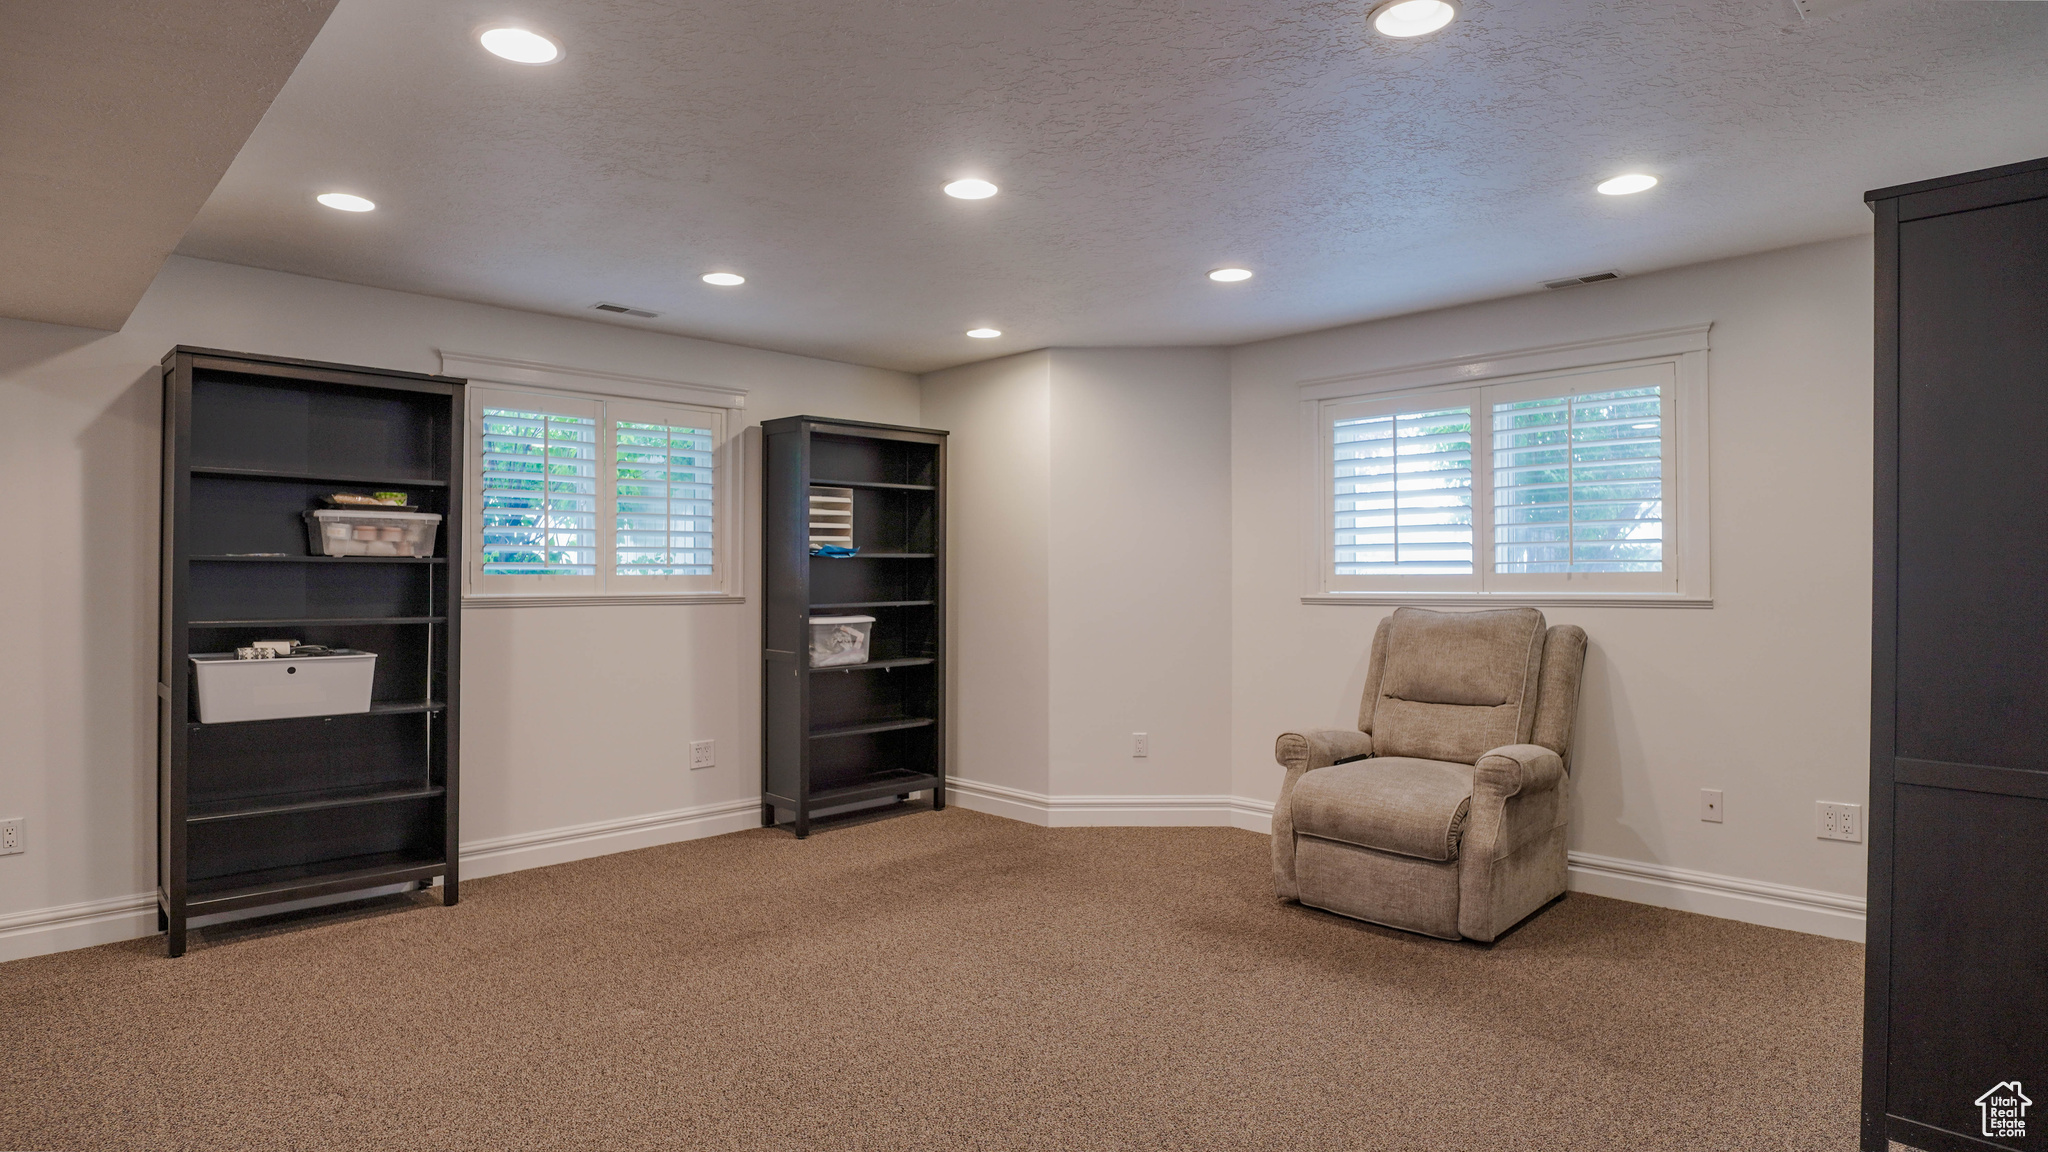 Spacious Basement Family Room with Natural Light and Ample Storage.